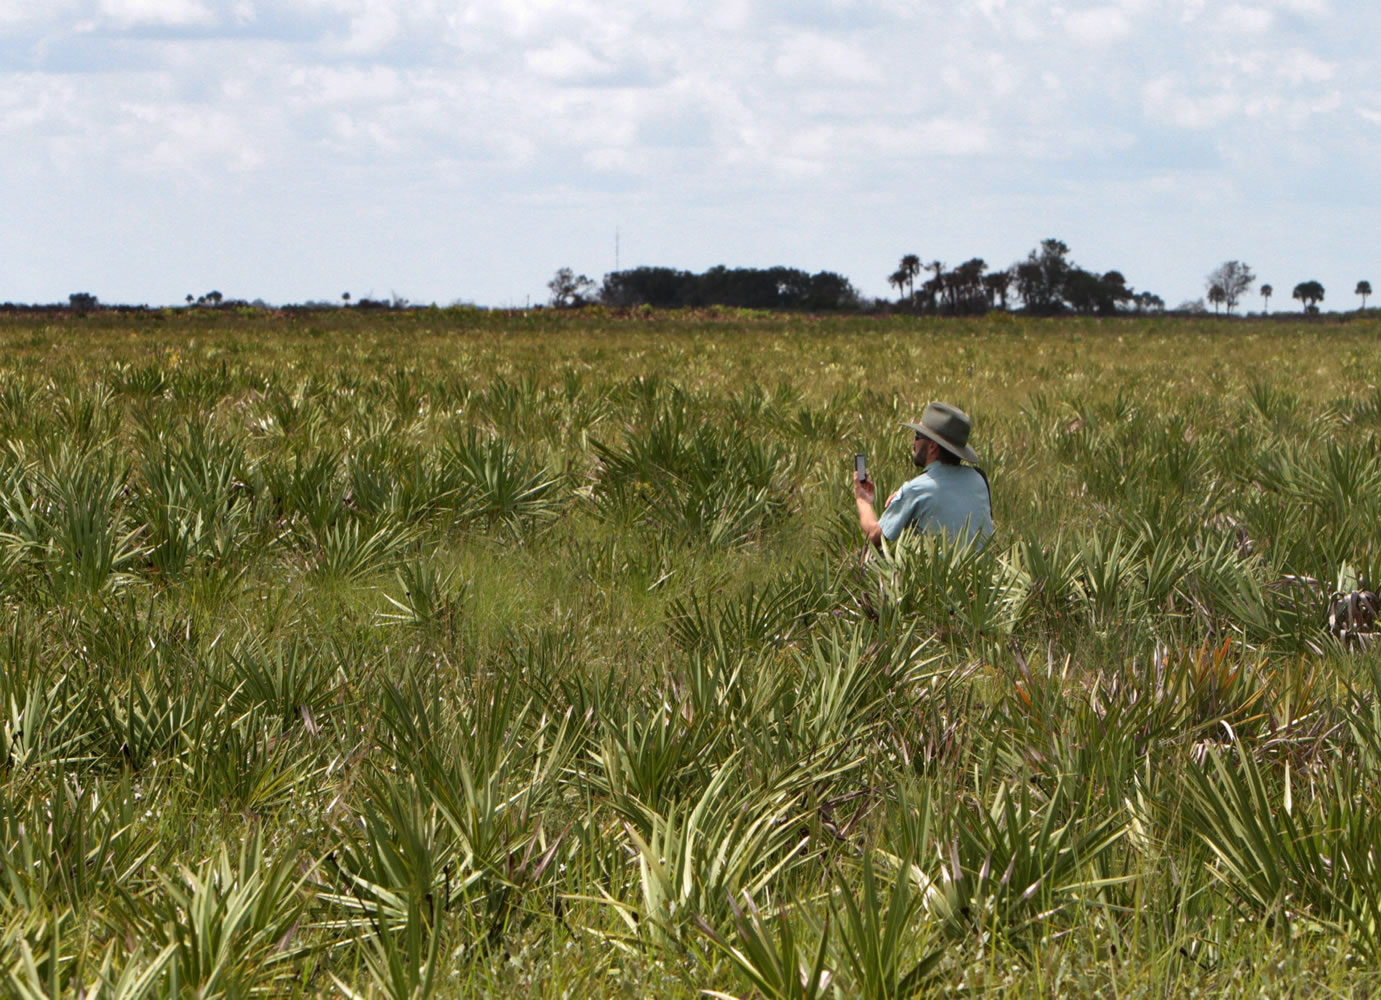 Paul Miller, biologist for the Florida Park Service, plays the call of the grasshopper sparrow to try and lure one out at Three Lakes Wildlife Management Area in Osceola County, Fla.